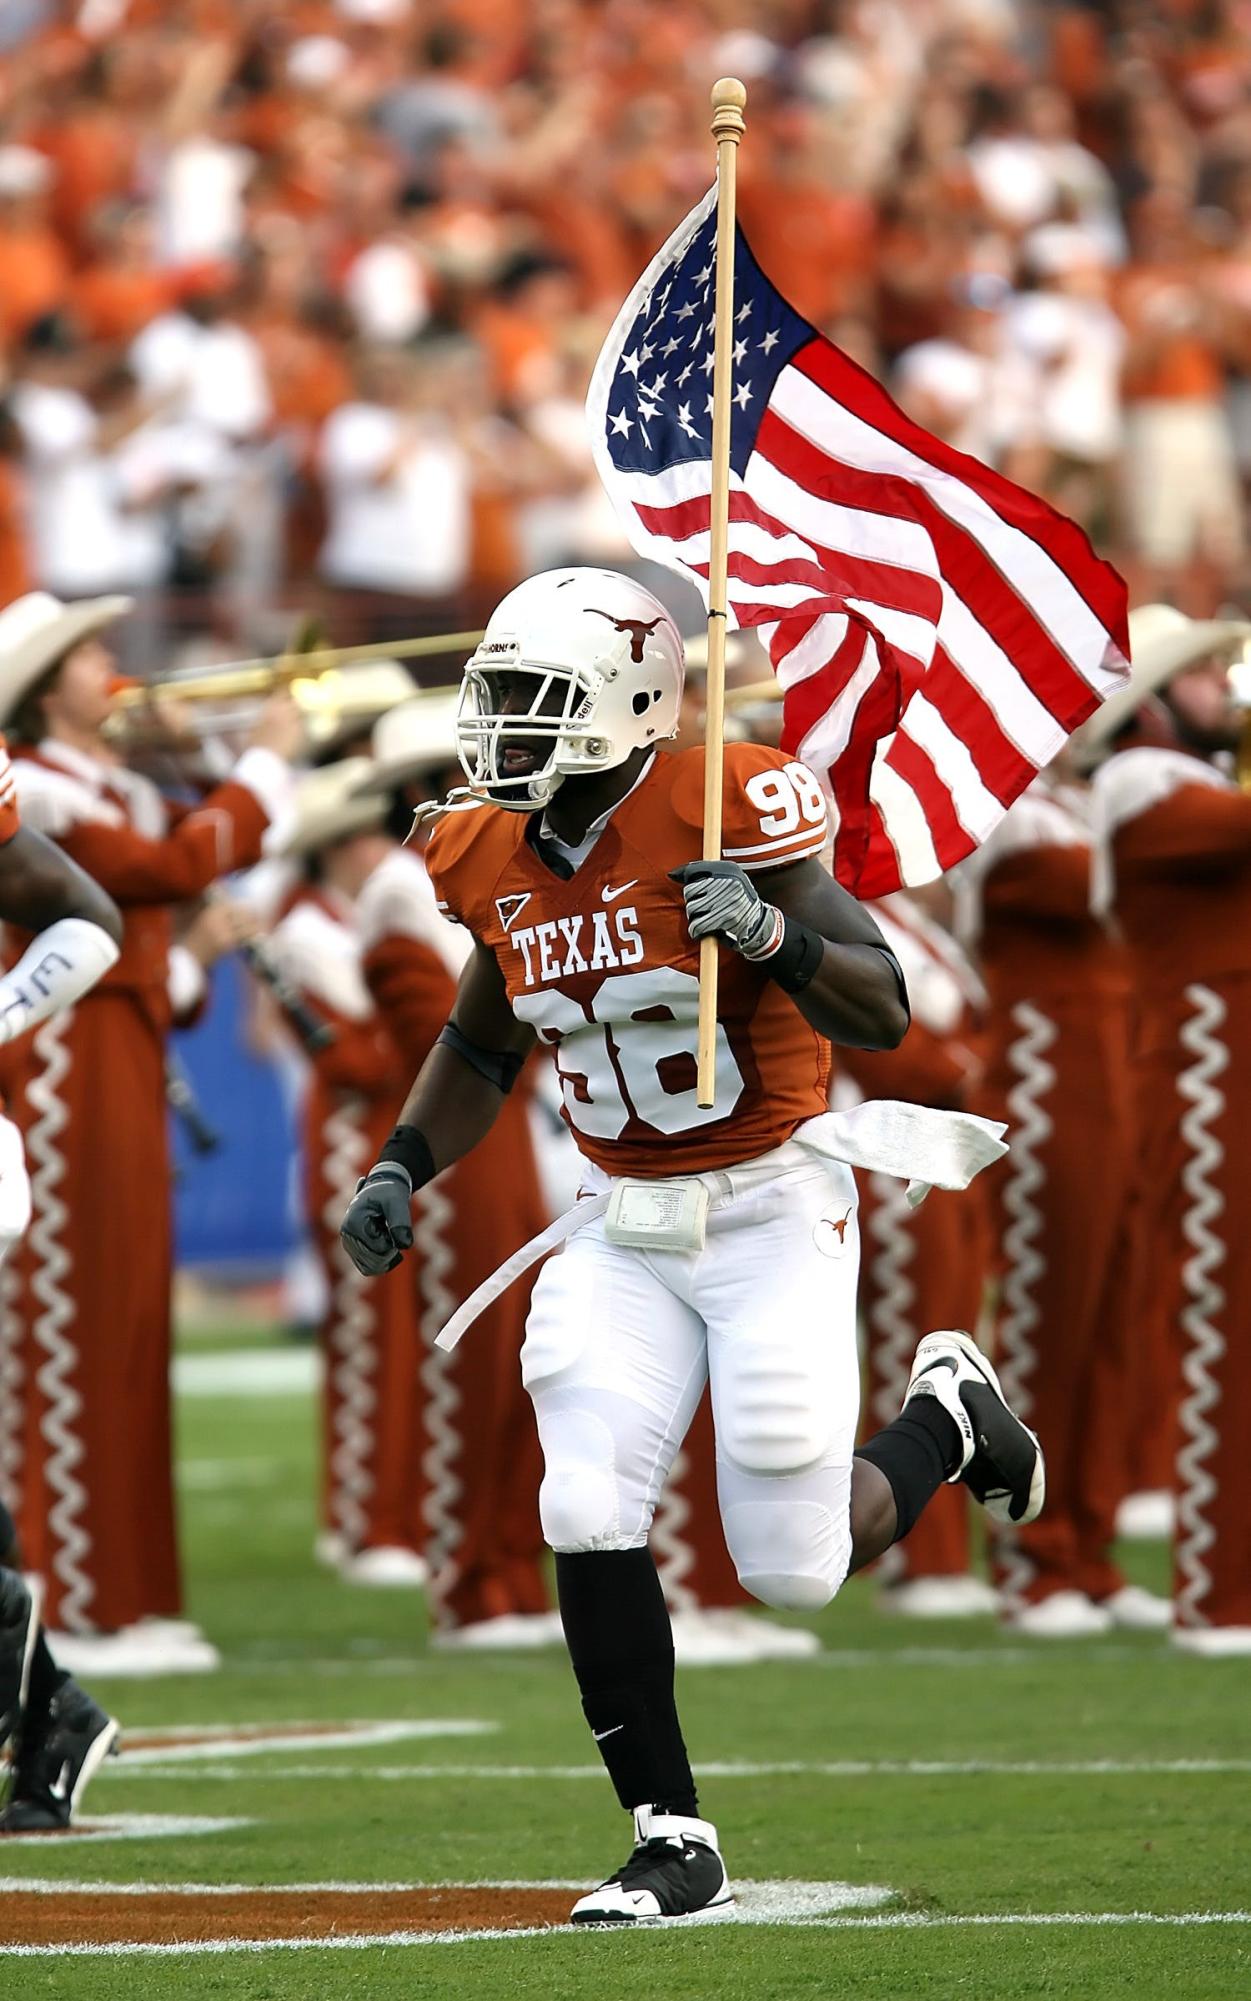 The Texas Longhorns have not earned a playoff trophy in two decades, but this could be their year. (Royalty-free photo by Pixabay via Pexels.com)